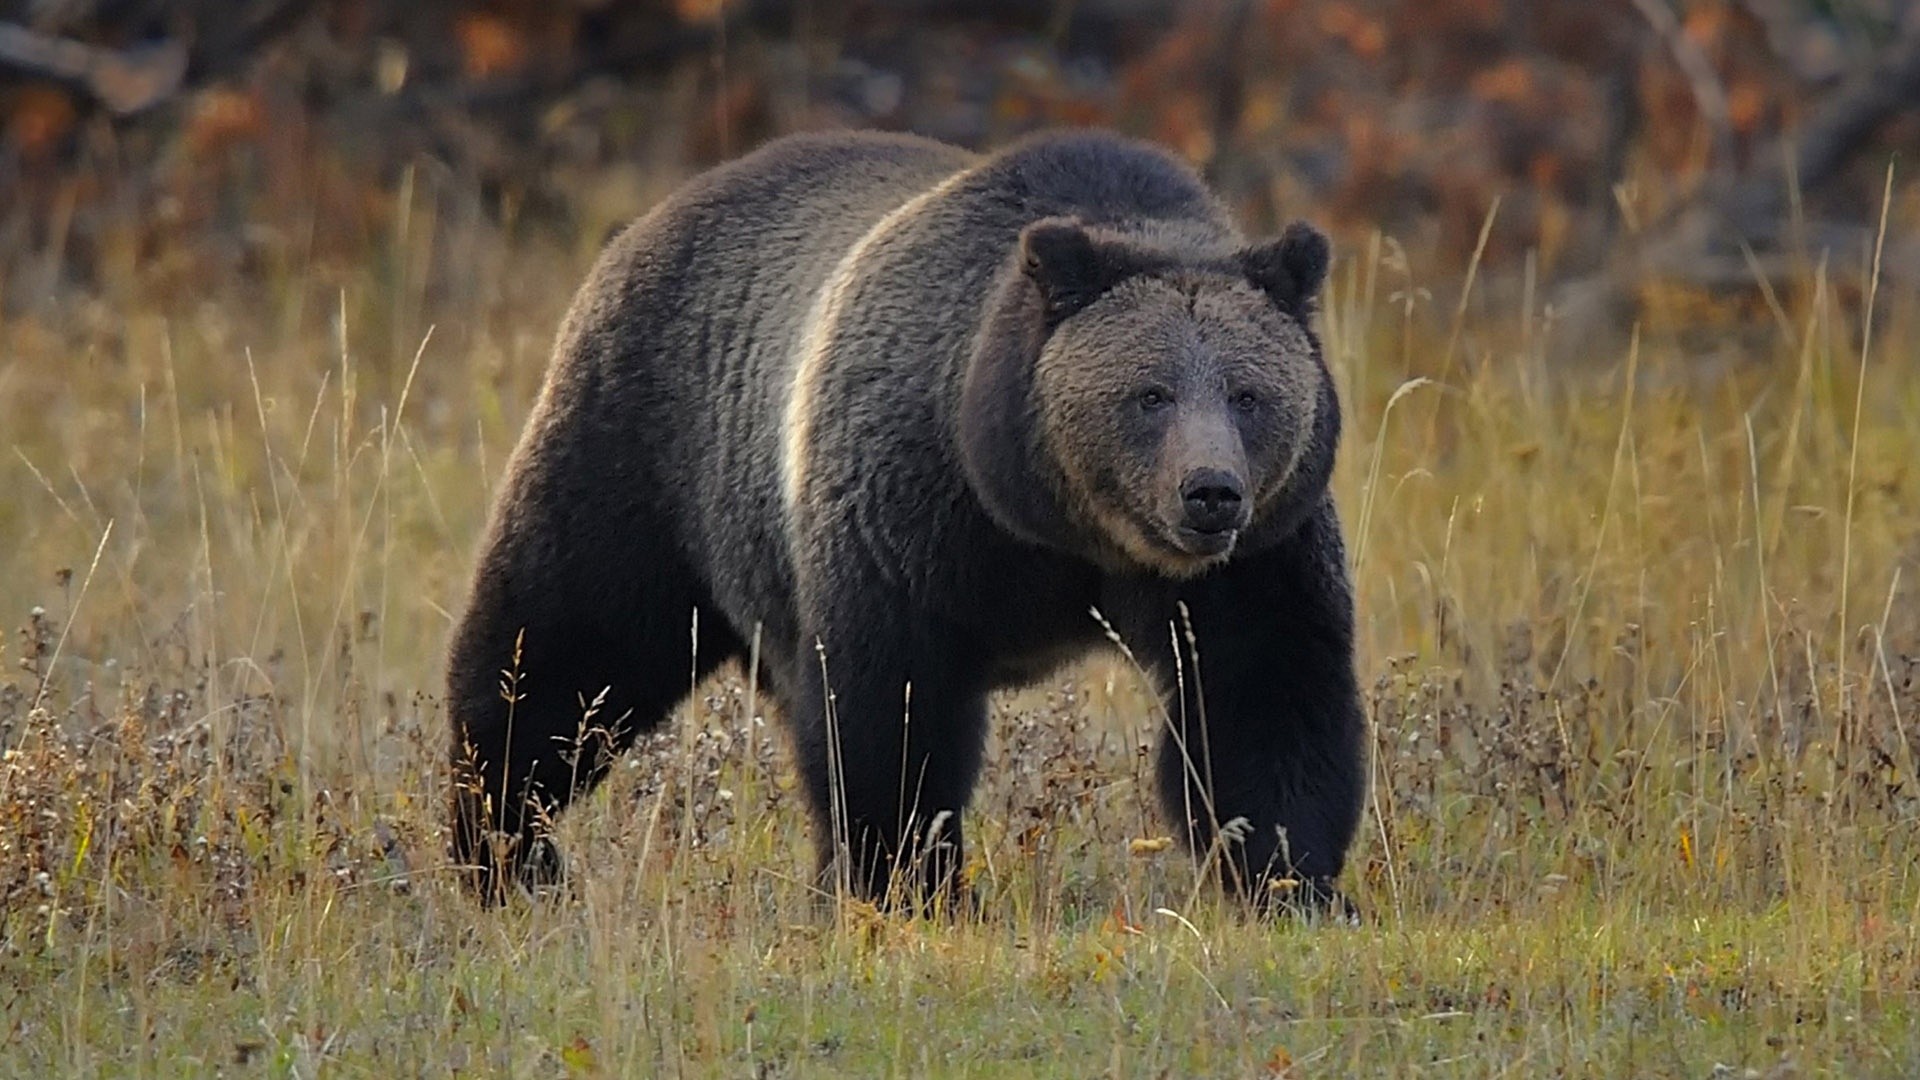 Montana Woman Found Dead After Grizzly Bear Mauling Near Yellowstone Identified